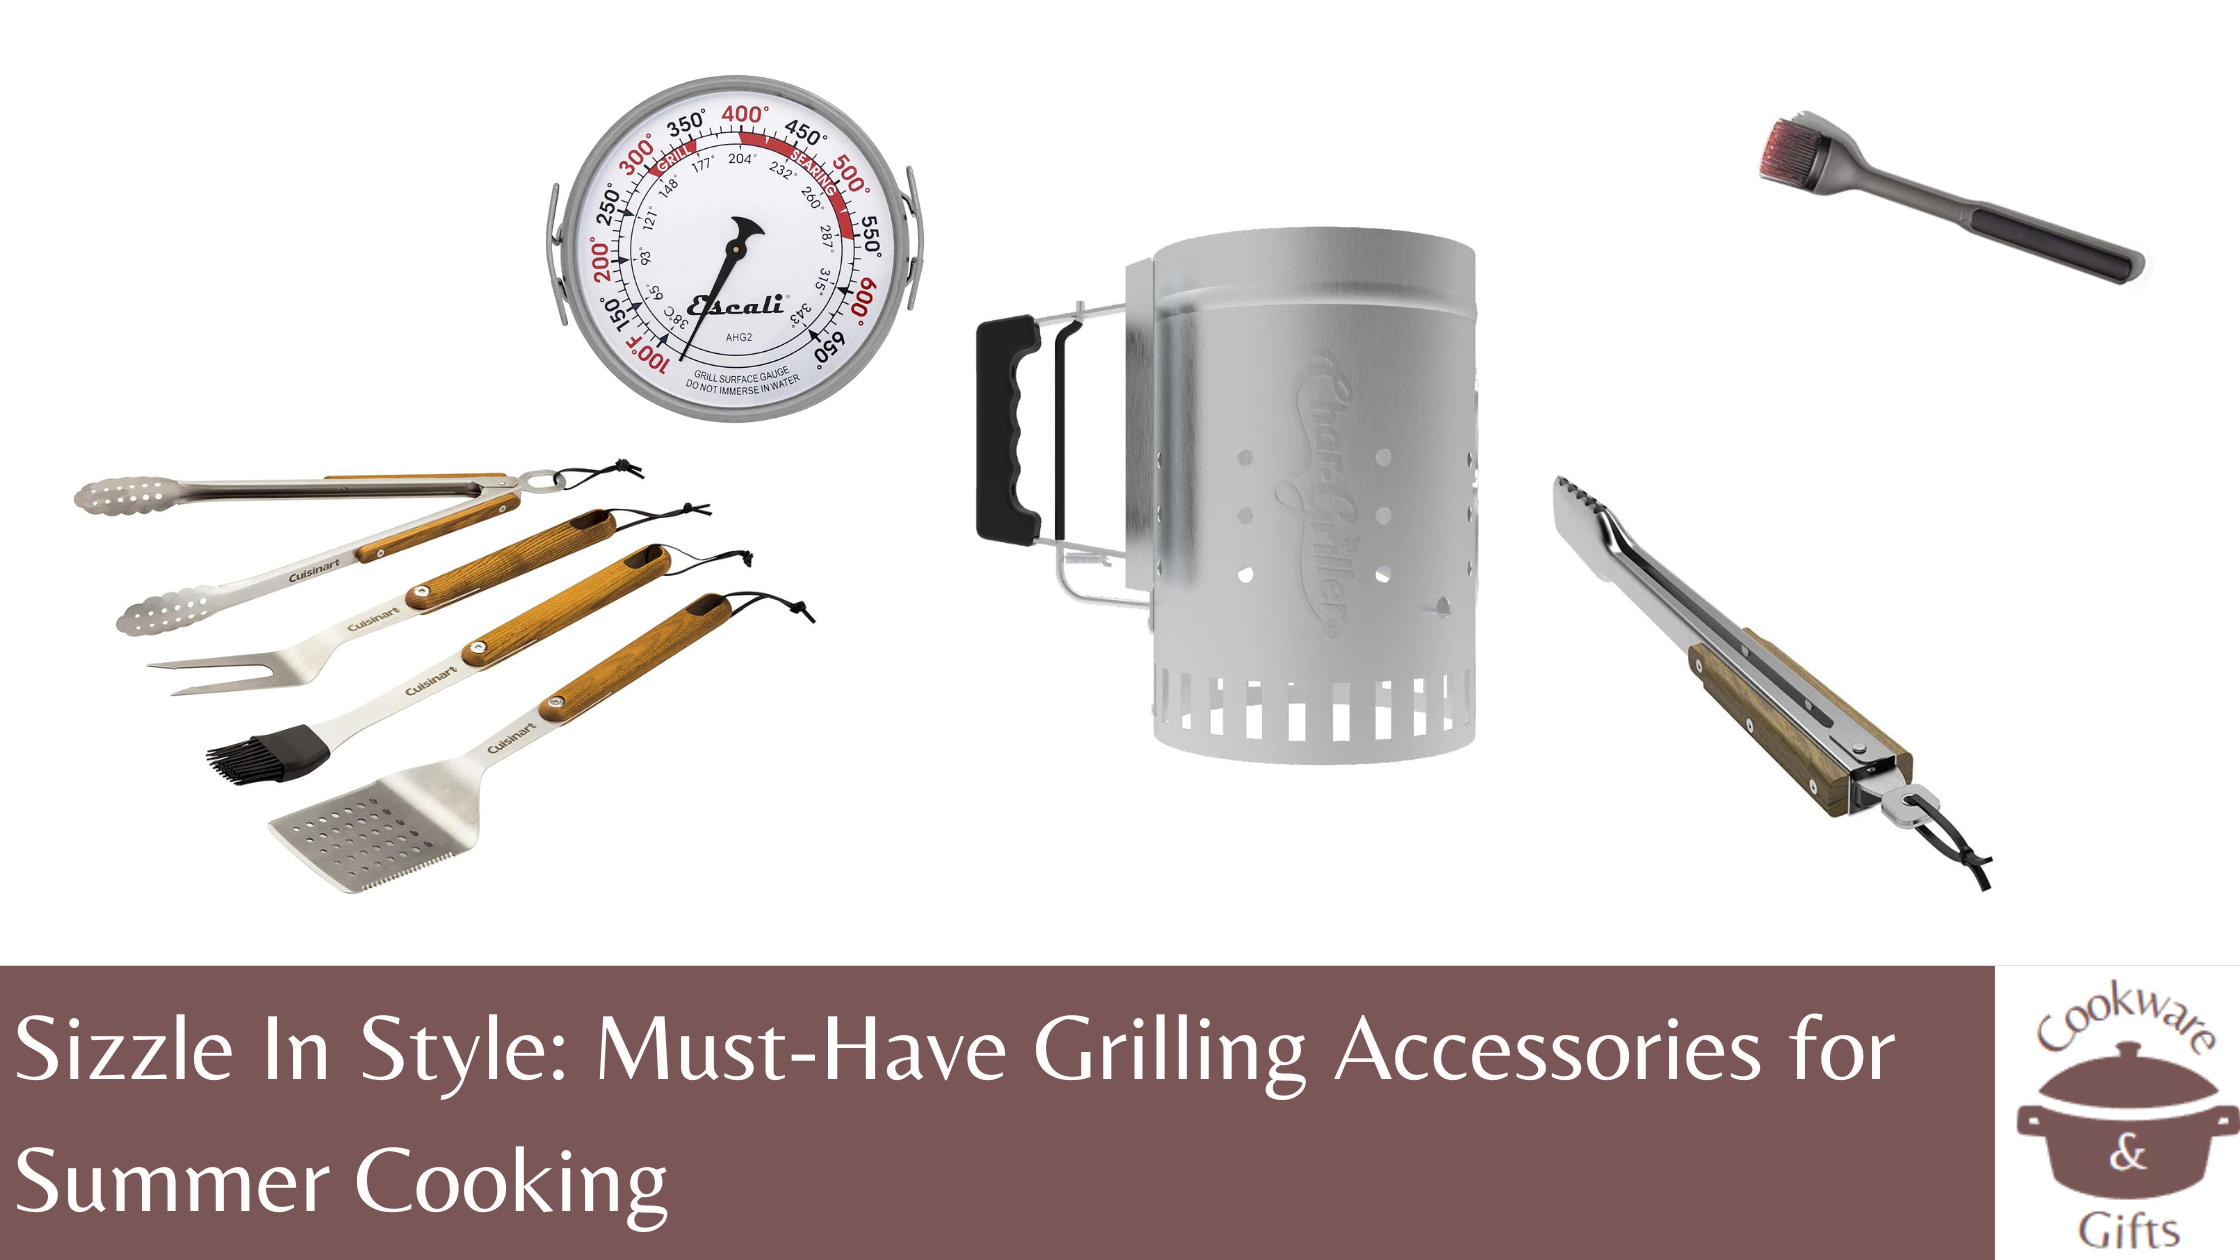 Sizzle In Style: Must-Have Grilling Accessories for Summer Cooking